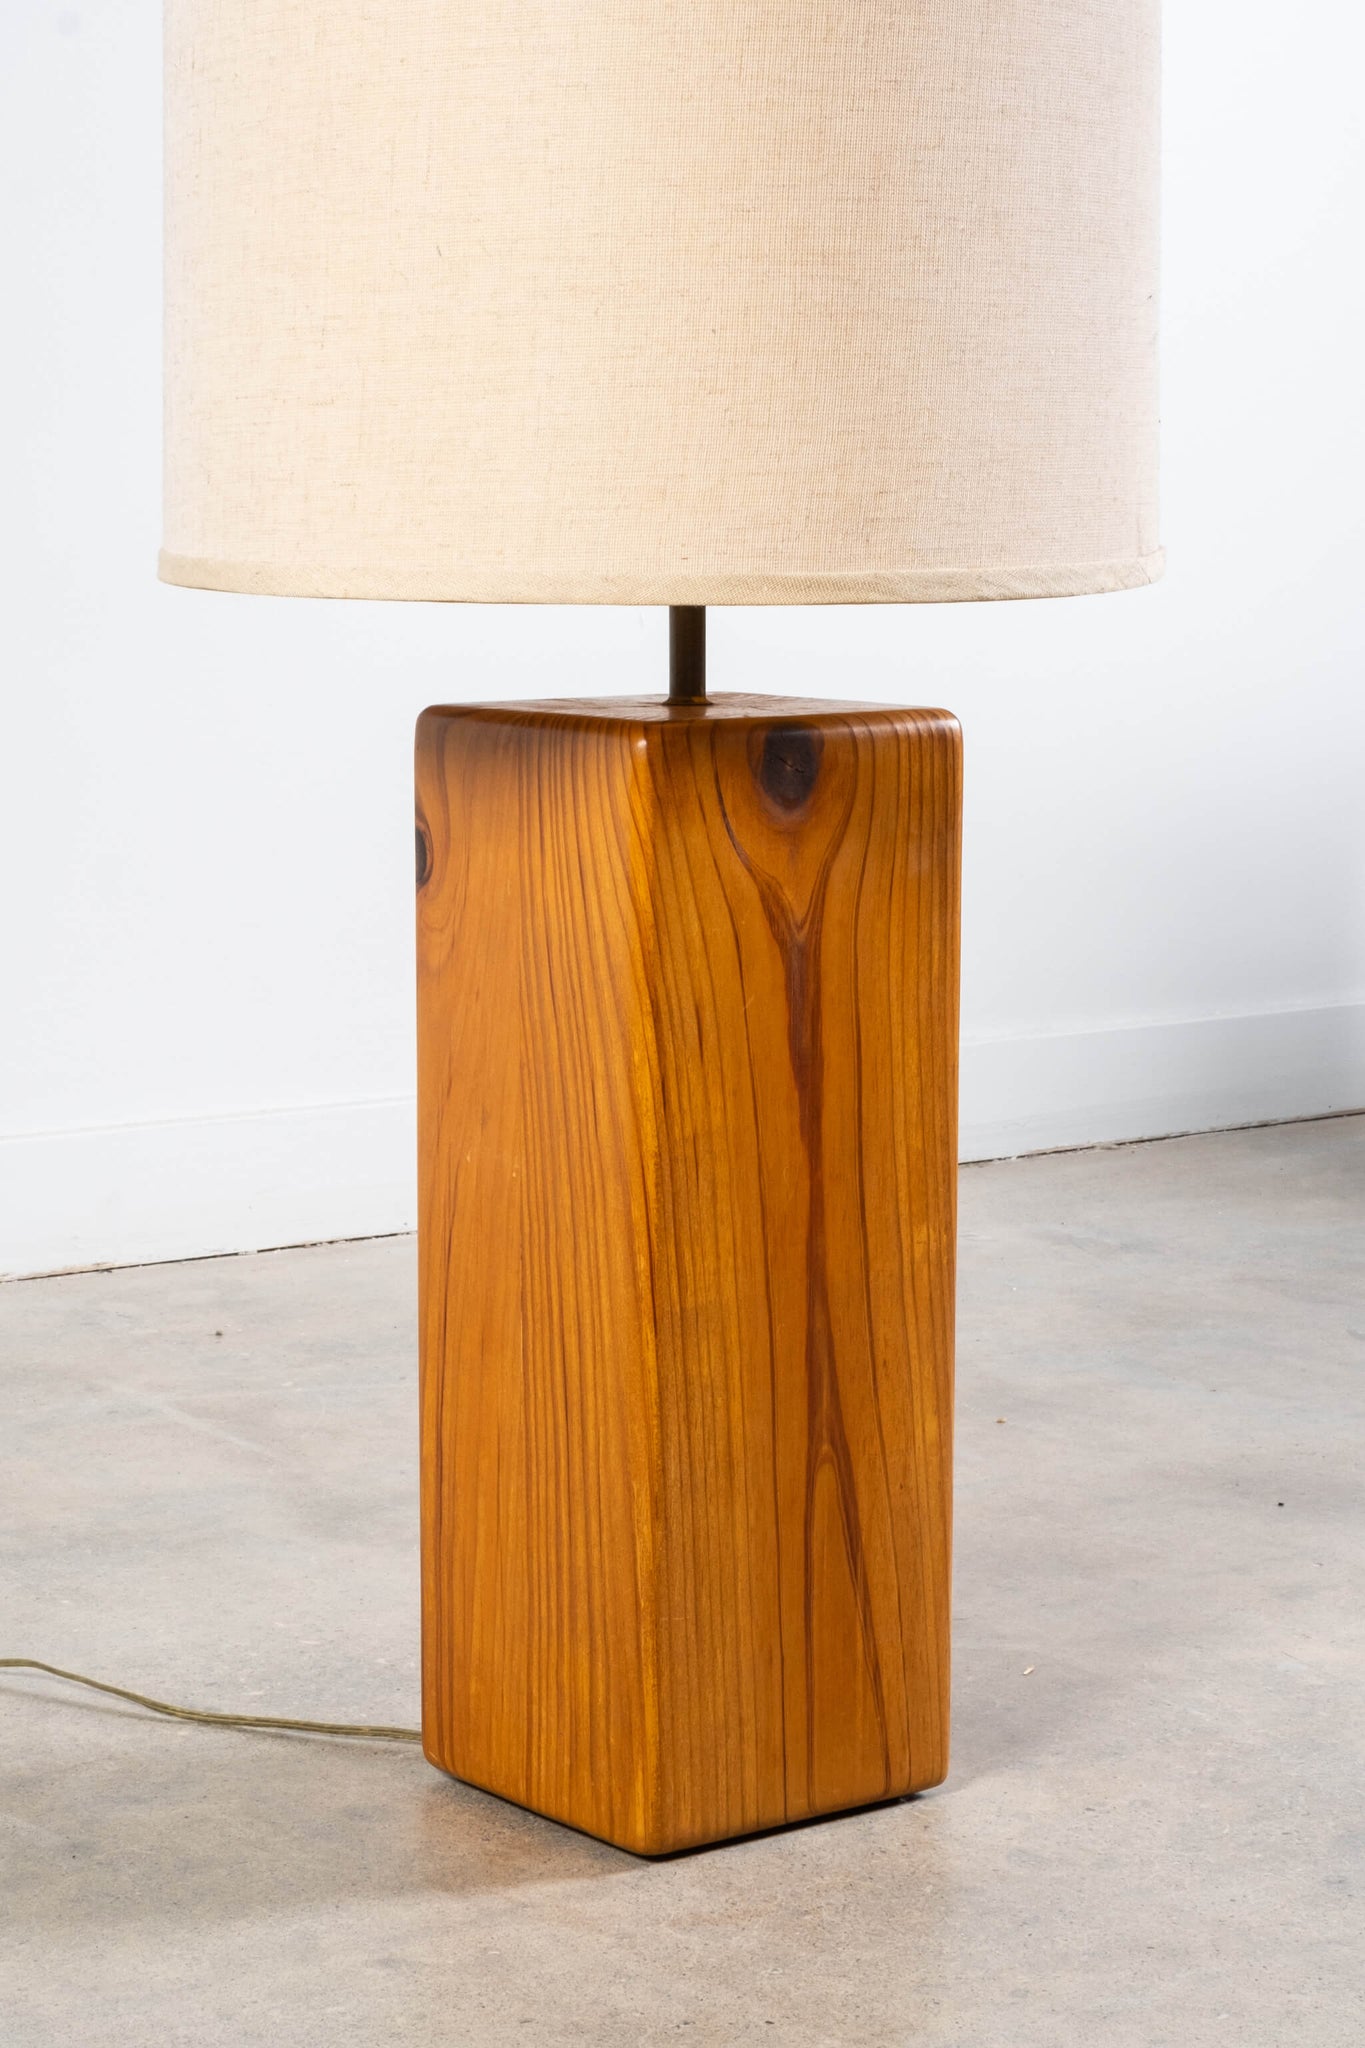 Vintage Pine Block Table Lamp with Cream Linen Shade, base detail view